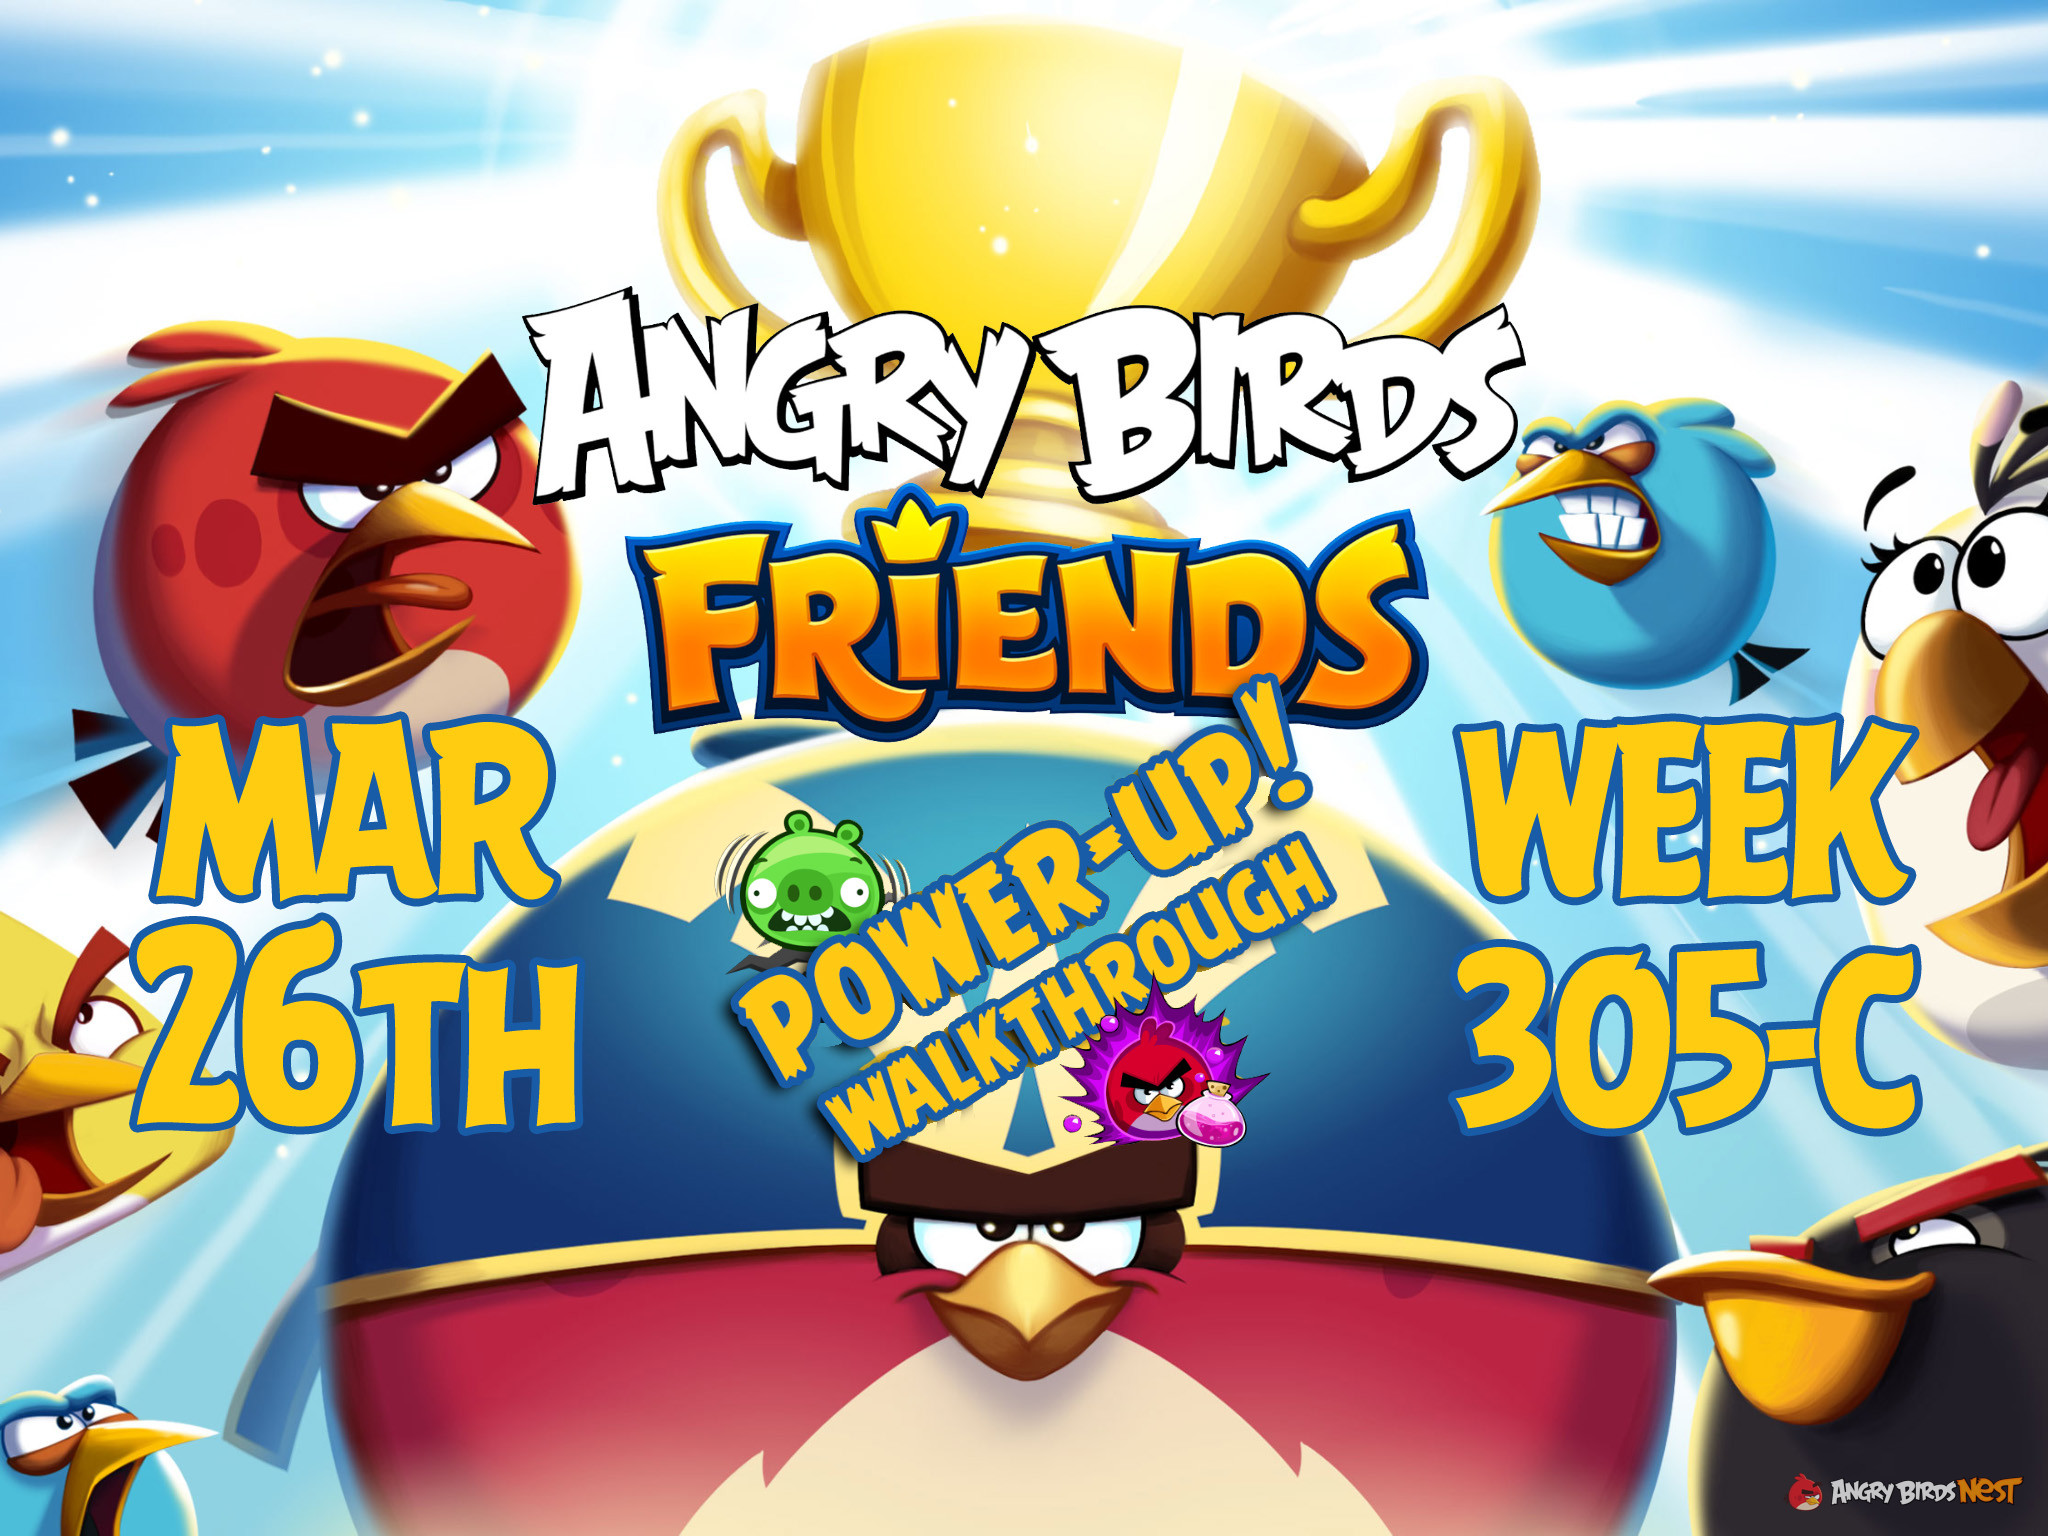 Angry Birds Friends Tournament Week 305-C Feature Image PU